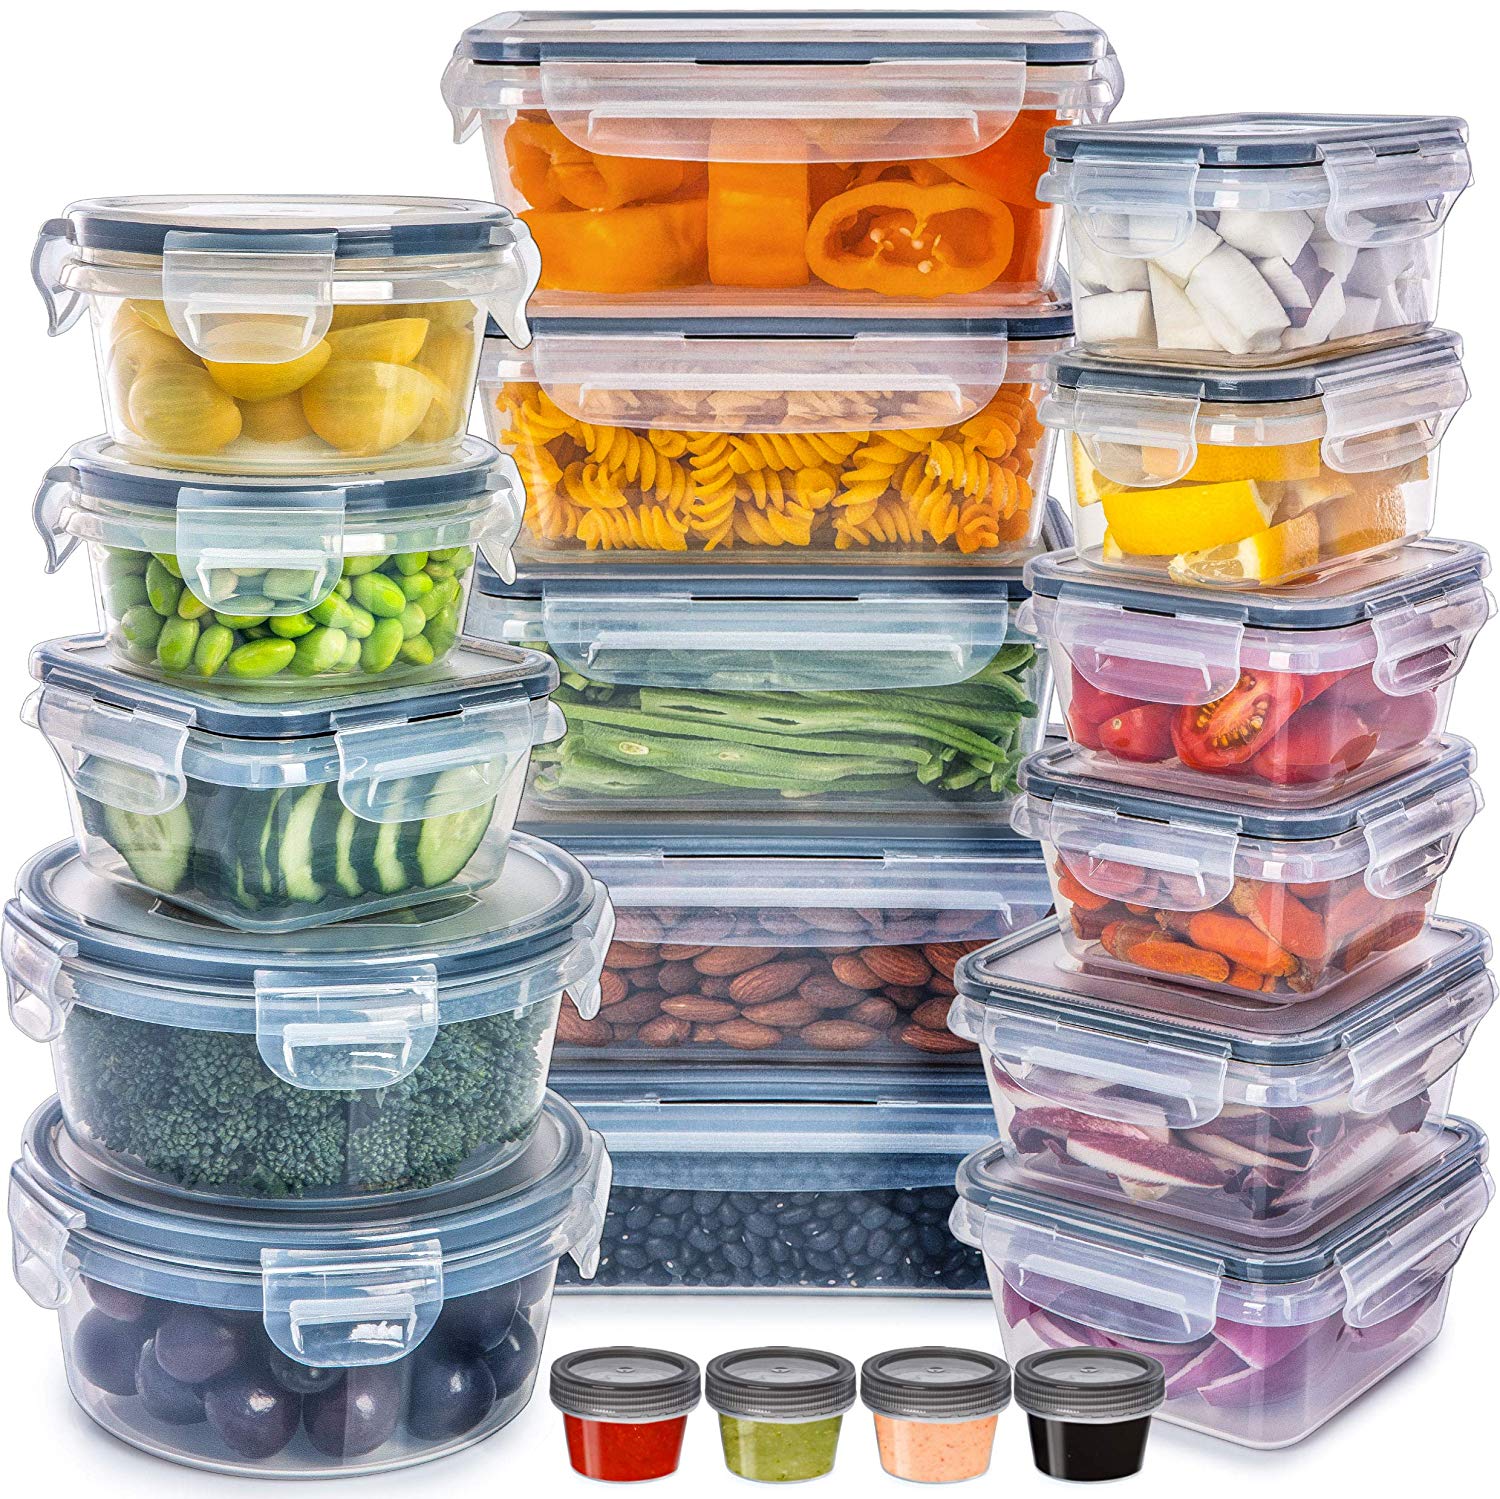 fullstar 50-piece Food storage Containers Set with Lids, Plastic Leak-Proof  BPA-Free Containers for Kitchen Organization, Meal Prep, Lunch Containers  (Includes …